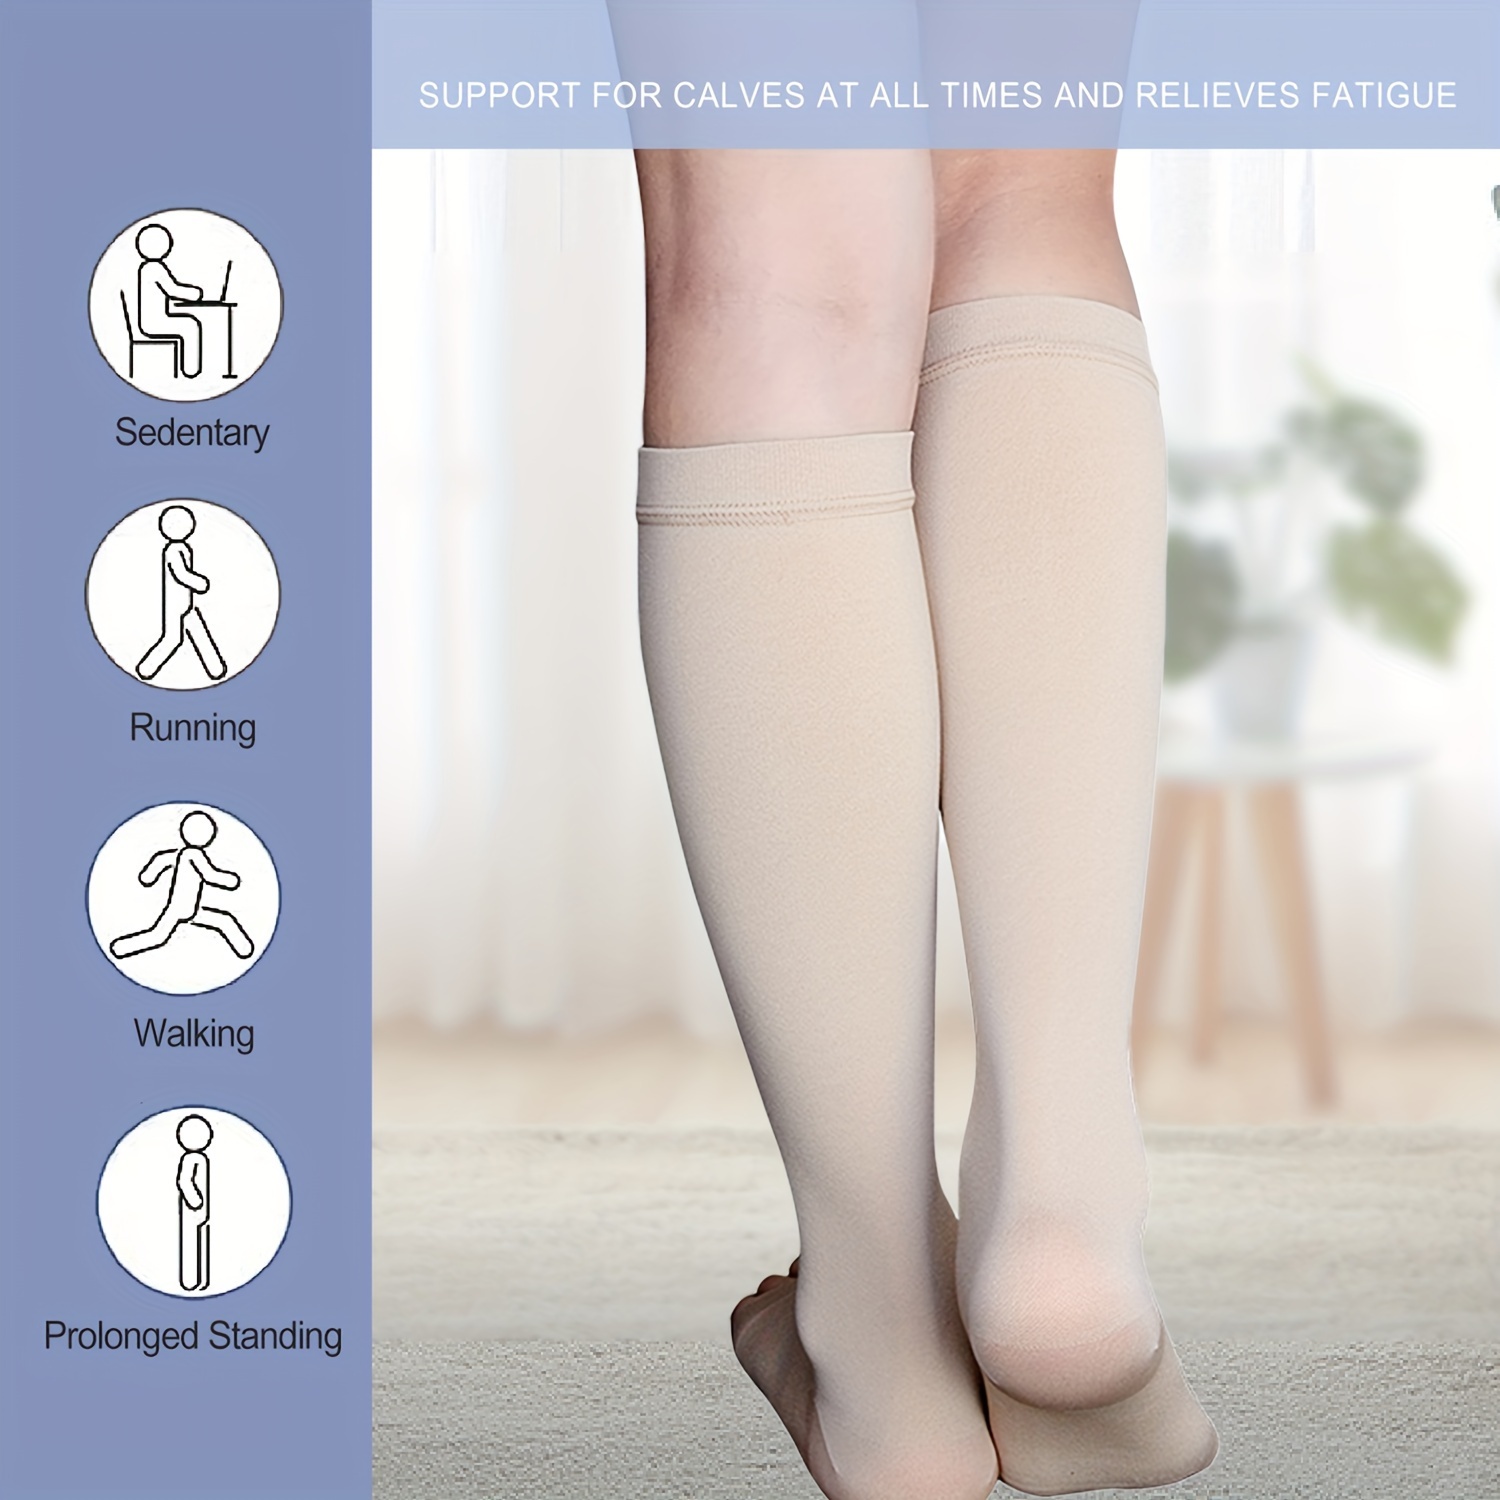 Compression Stockings For Varicose Veins